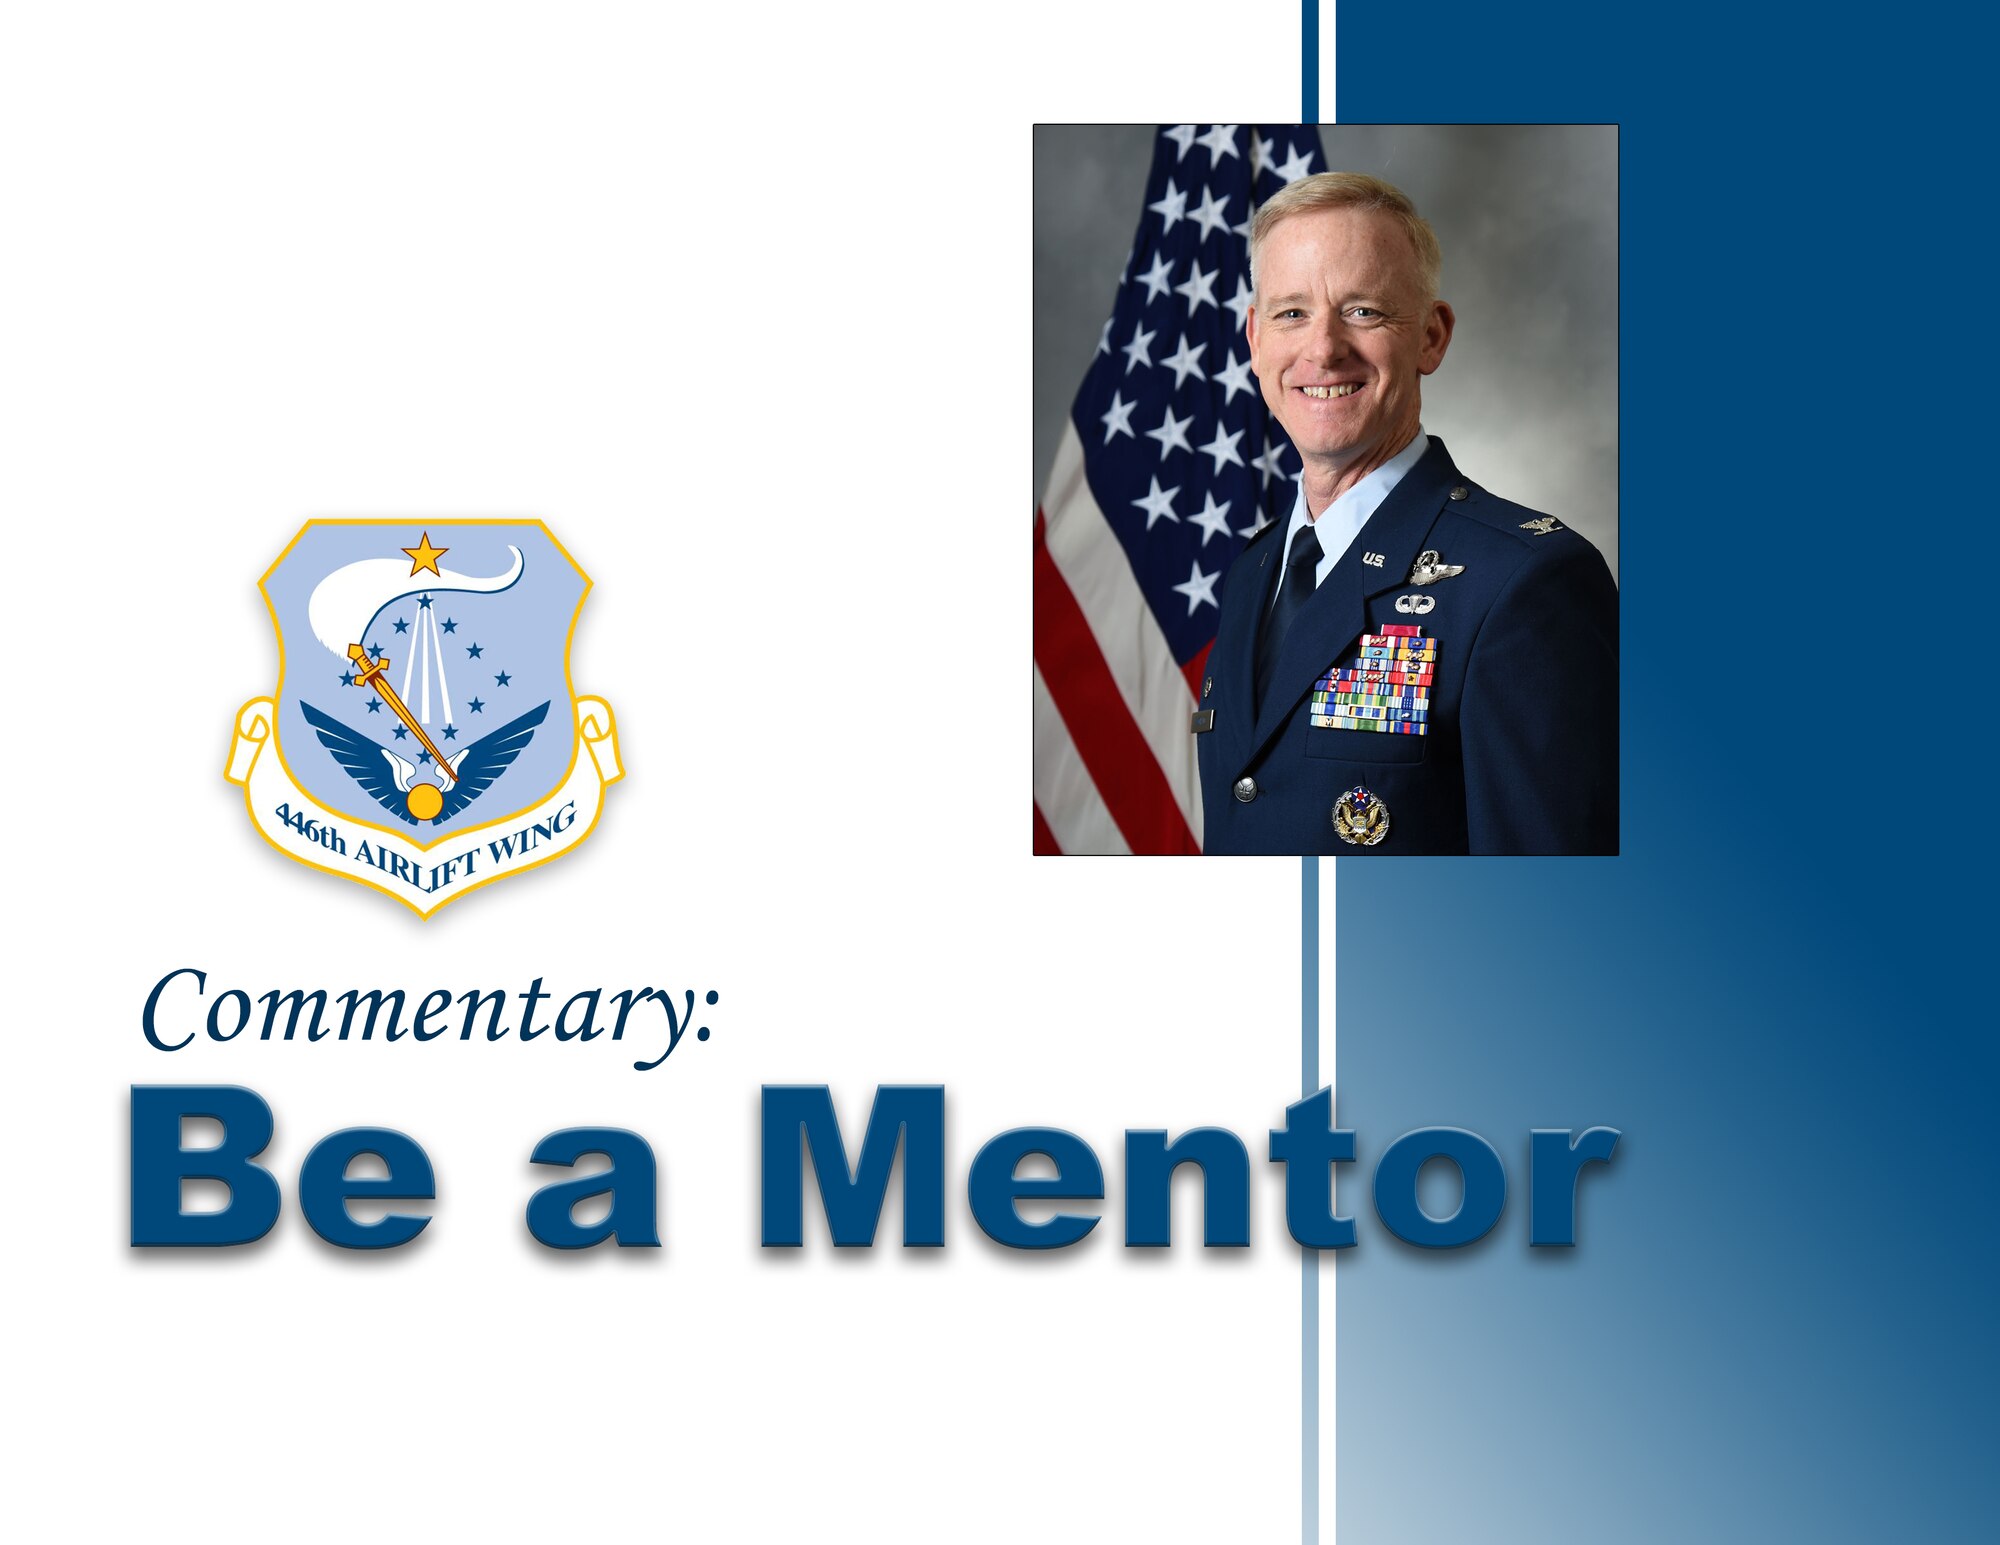 Col. Tony P. Angello, 446th Airlift Wing vice commander, discusses the importance of mentoring and establishing a mentoring program at the Rainier Wing.